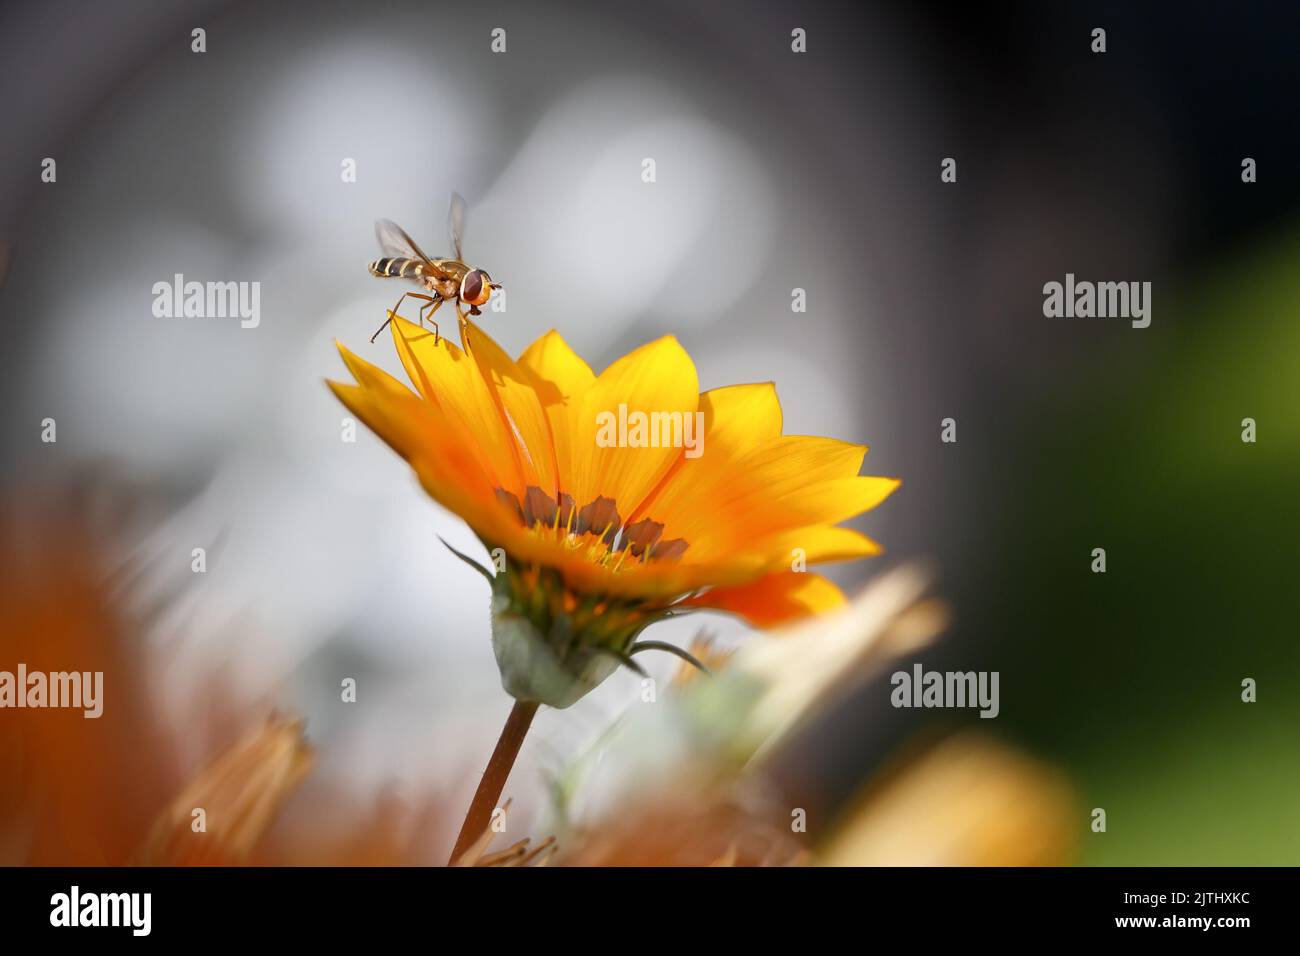 A hoverfly sits on the edge of a yellow flower. Blurred background. Macro photography. Stock Photo